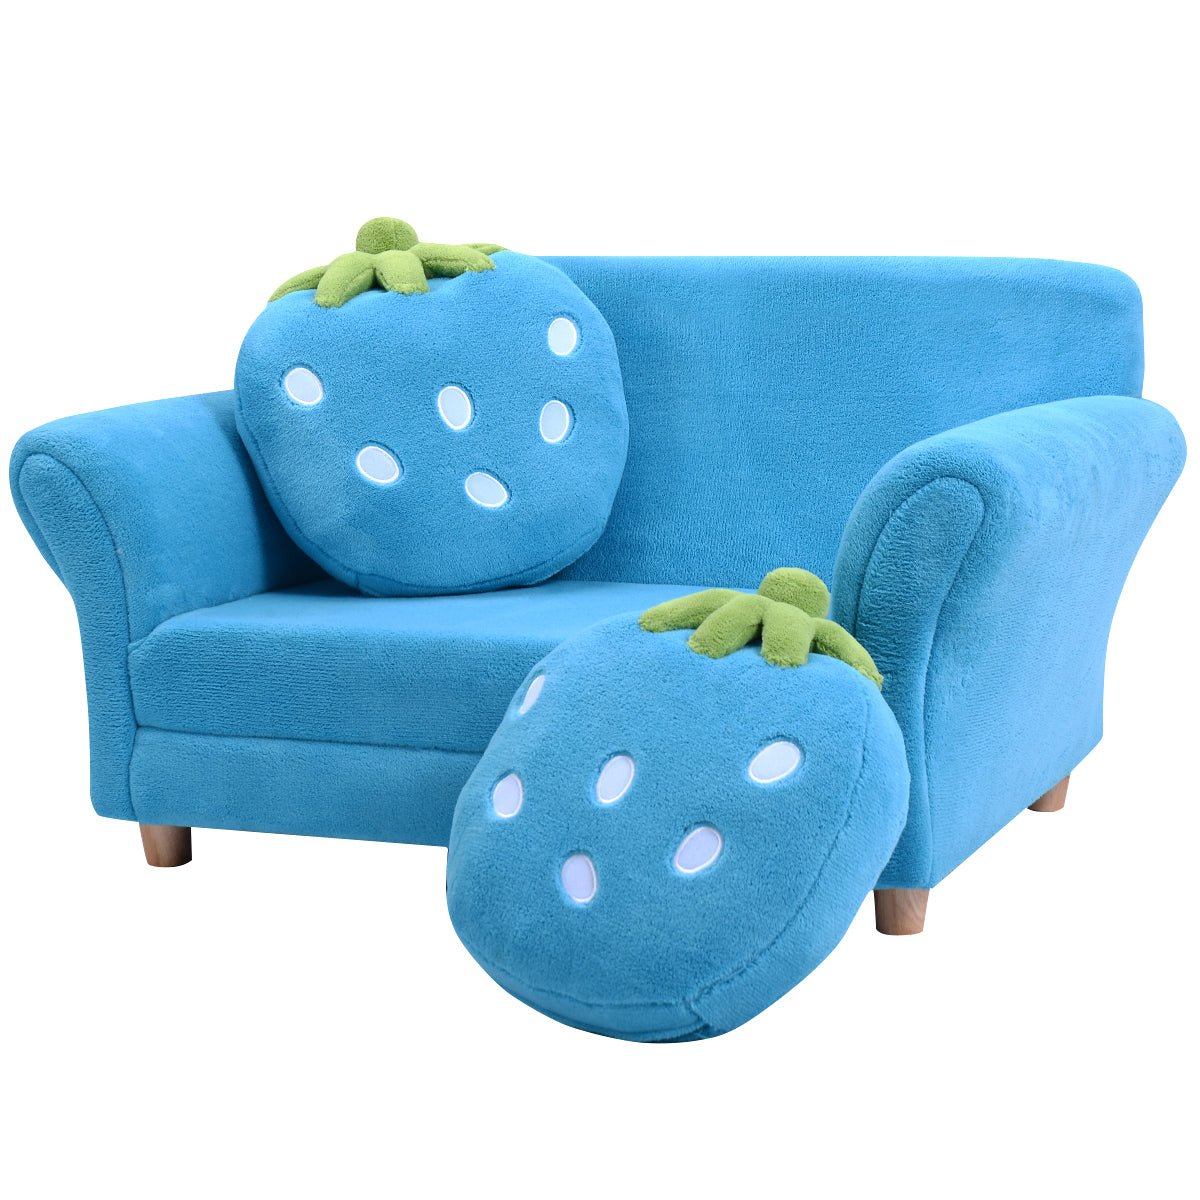 Children's 2-Seat Sofa: Lounge Bed with 2 Strawberry Pillows for Rest